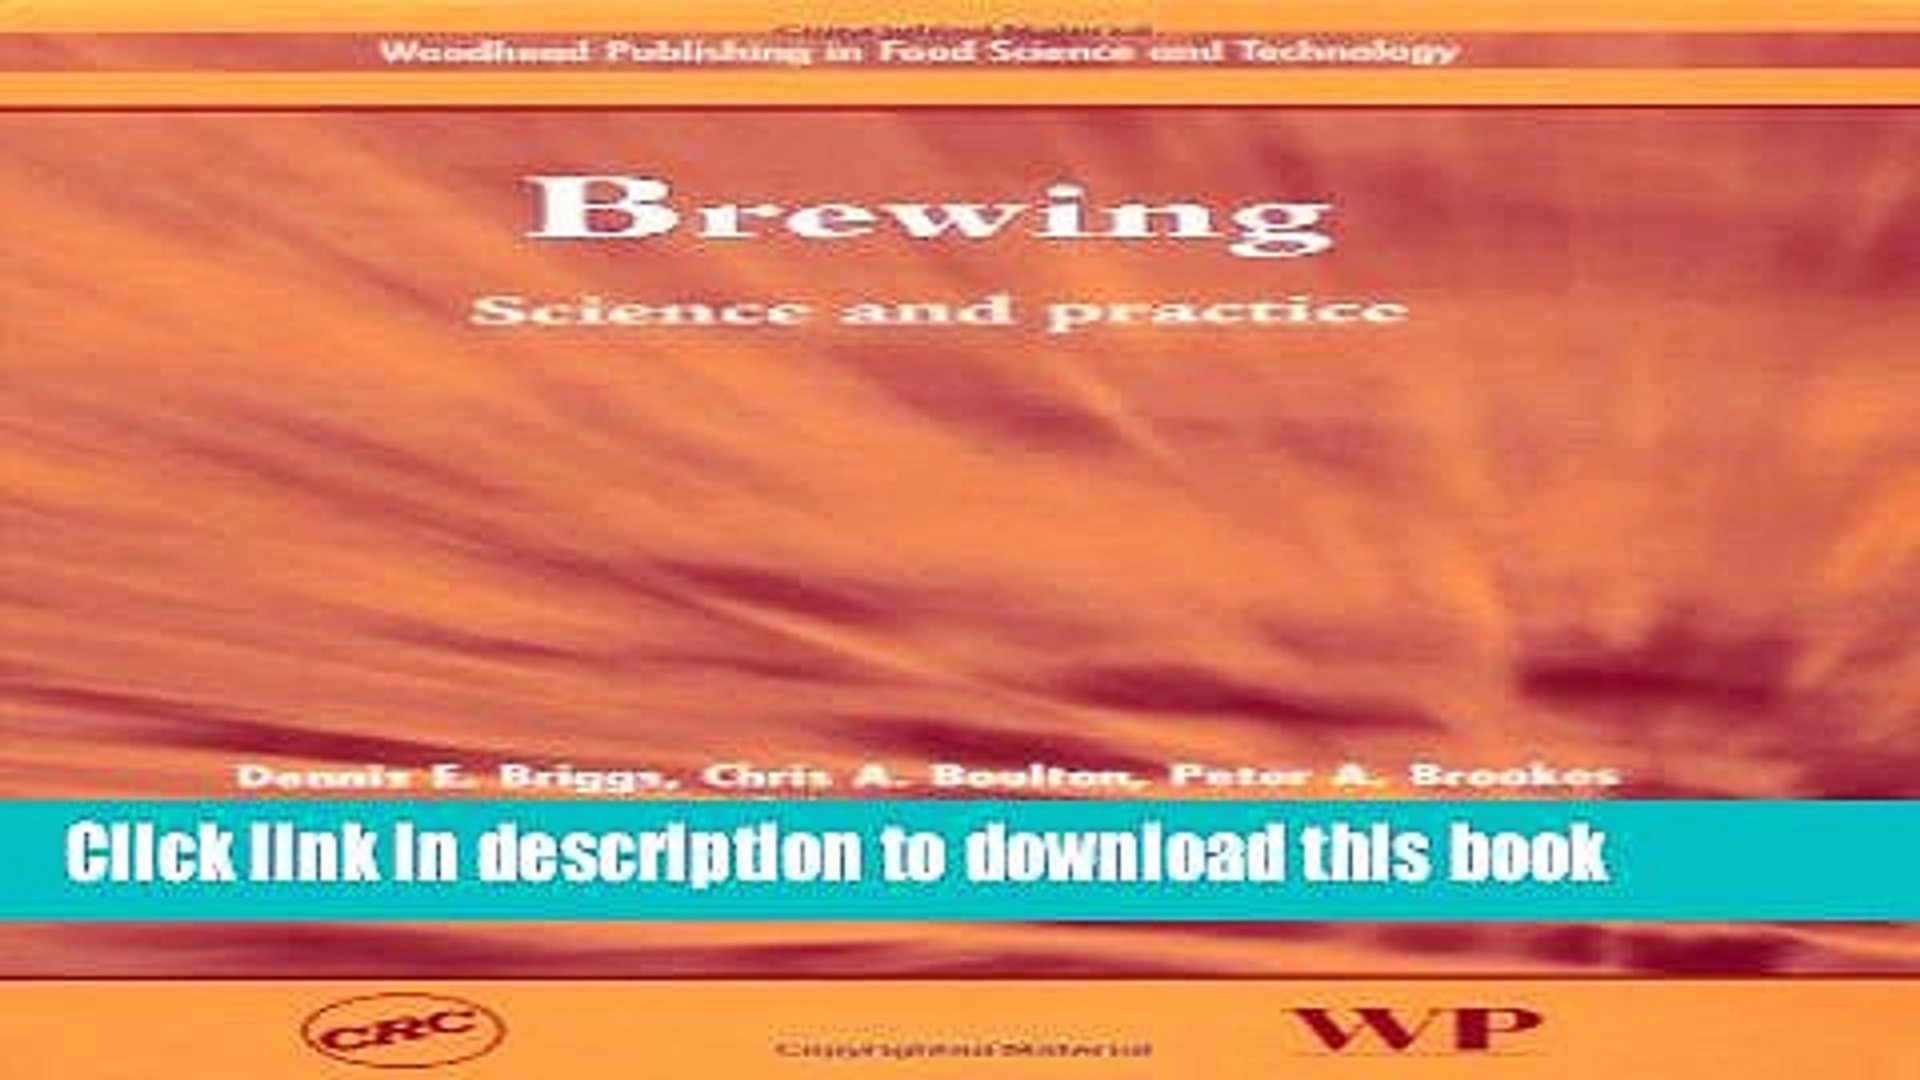 [PDF] Brewing: Science and Practice (Woodhead Publishing in Food Science and Technology) E-Book